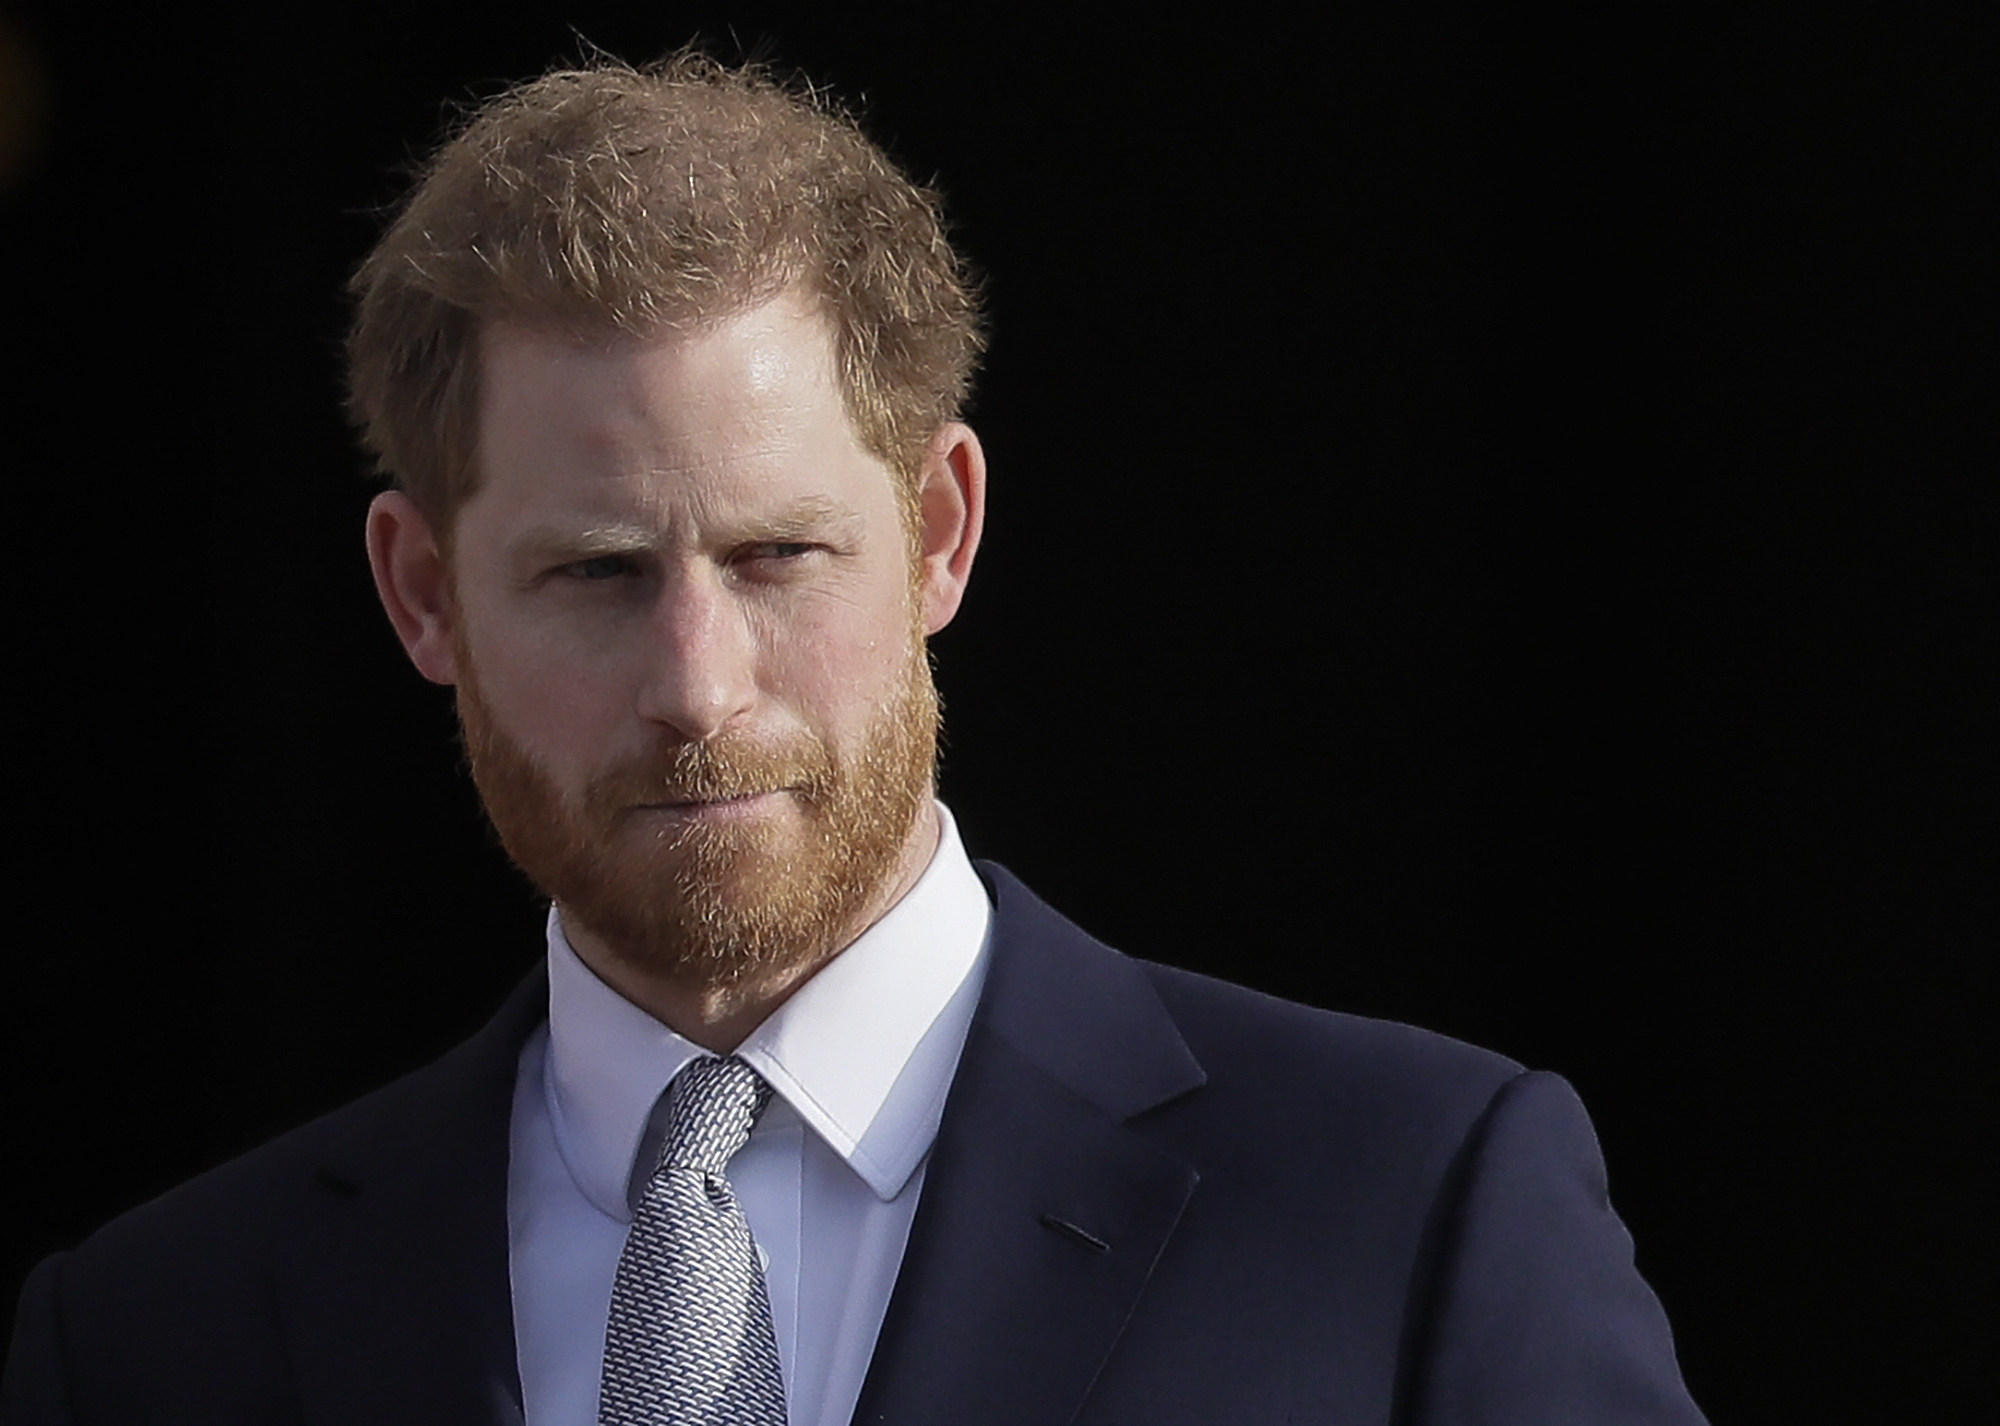 A British judge ruled on Friday that a lawsuit by Prince Harry, Elton John and five other celebrities accusing a newspaper publisher of unlawful information-gathering should go to a full trial. Photo: AP